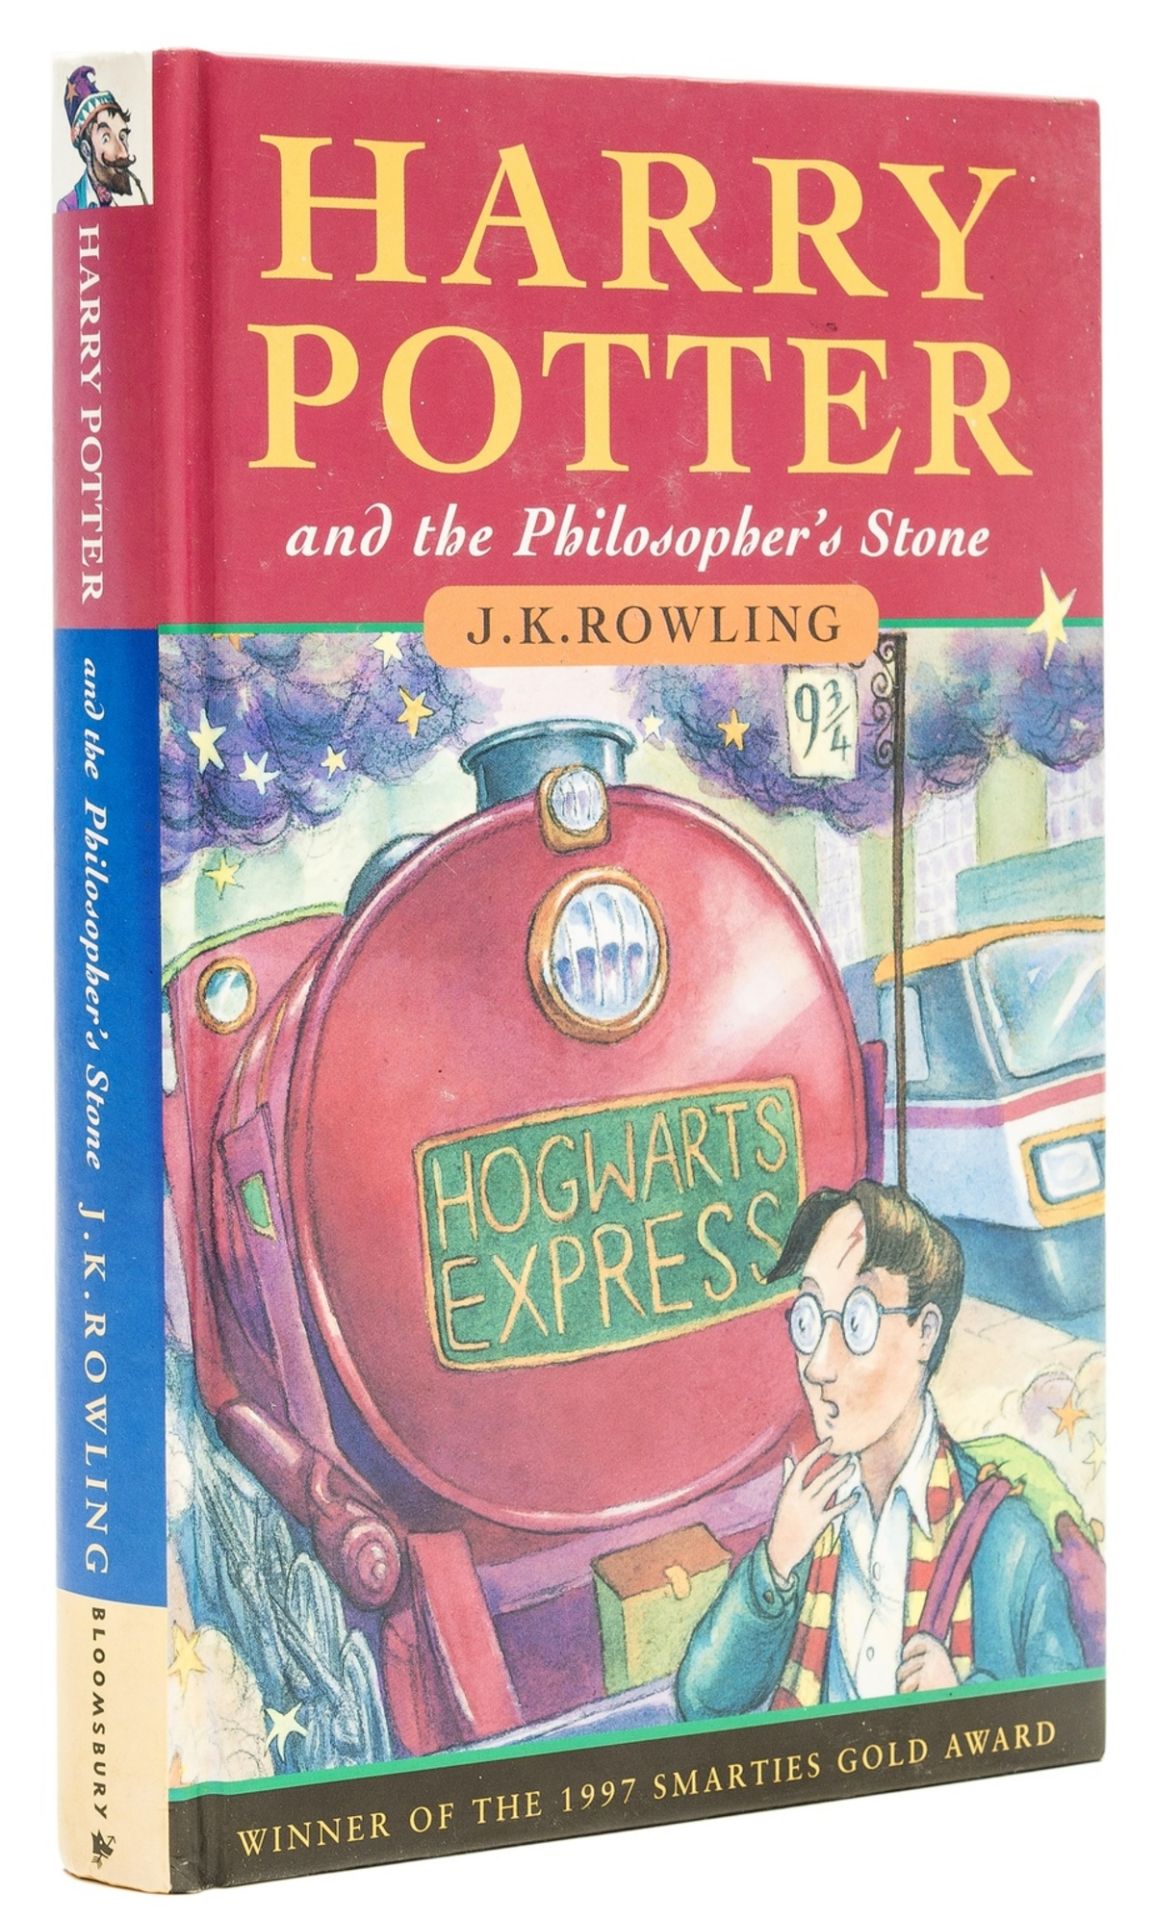 Rowling (J.K.) Harry Potter and the Philosopher's Stone, first edition, third printing, 1997.